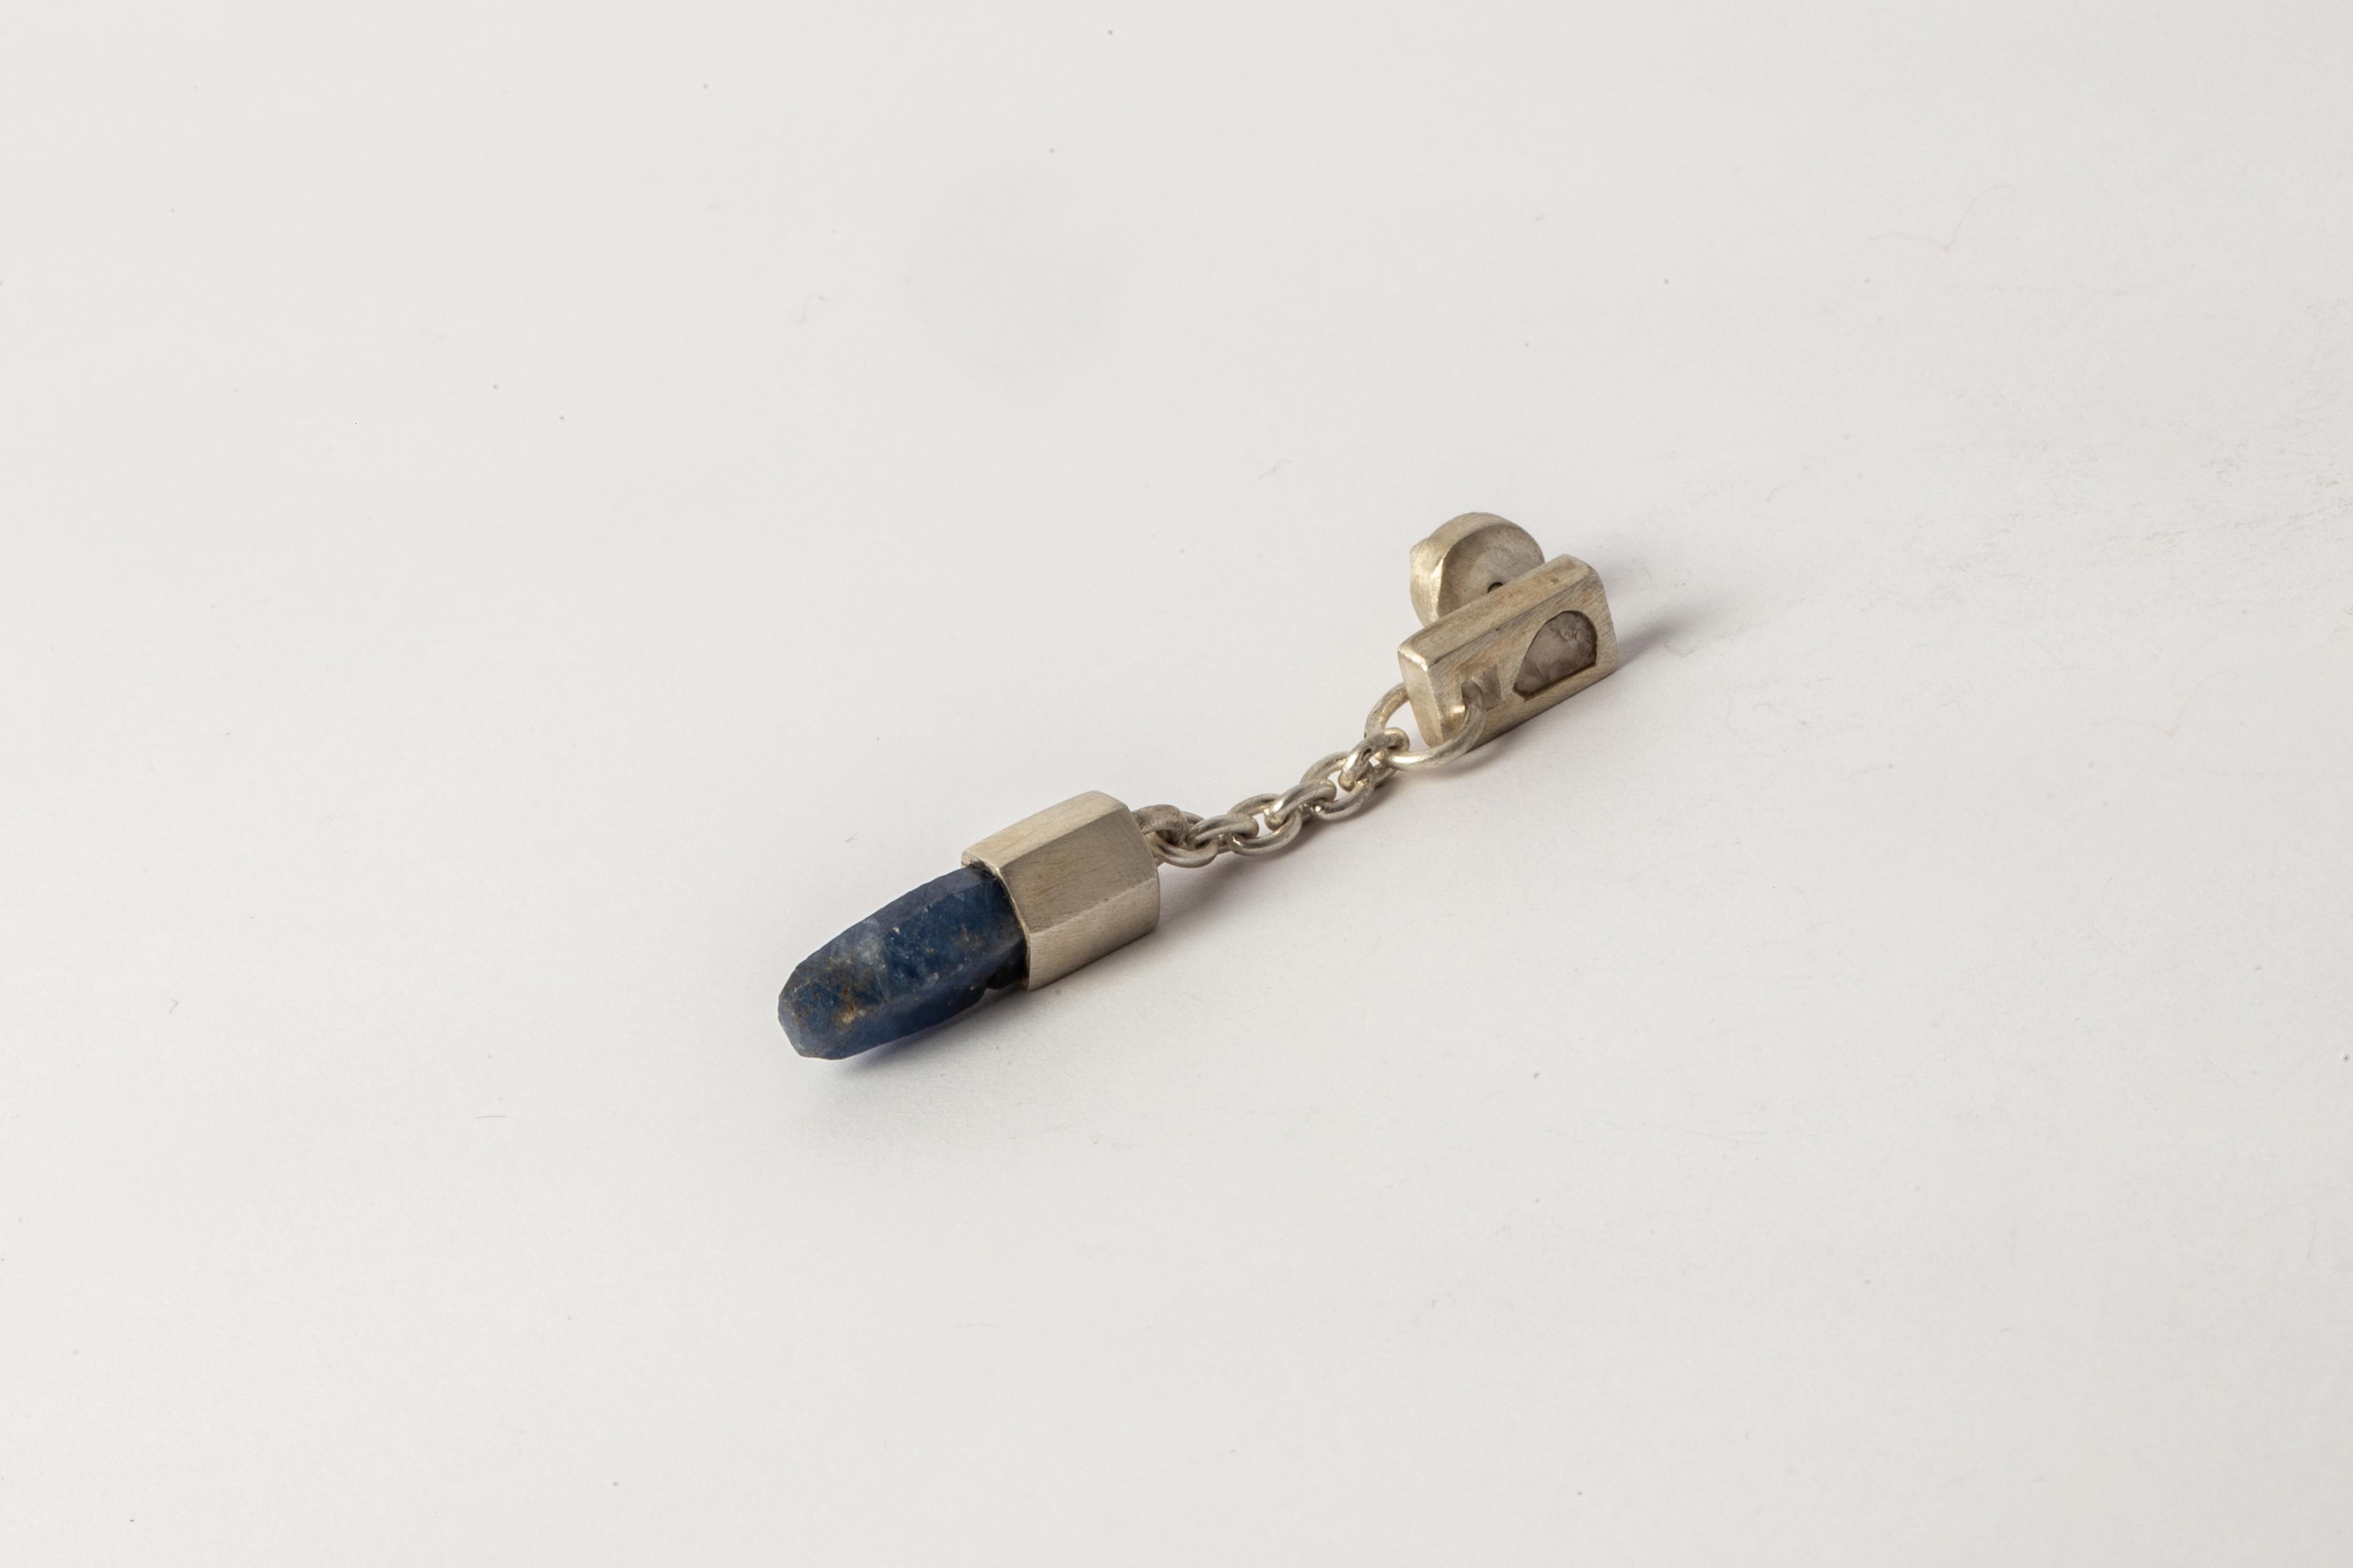 Dangle earring in sterling silver and a slab of rough diamond with blue sapphire crystal. This slab is removed from a larger chunk of diamond. This item is made with a naturally occurring element and will vary from the photograph you see. Each piece